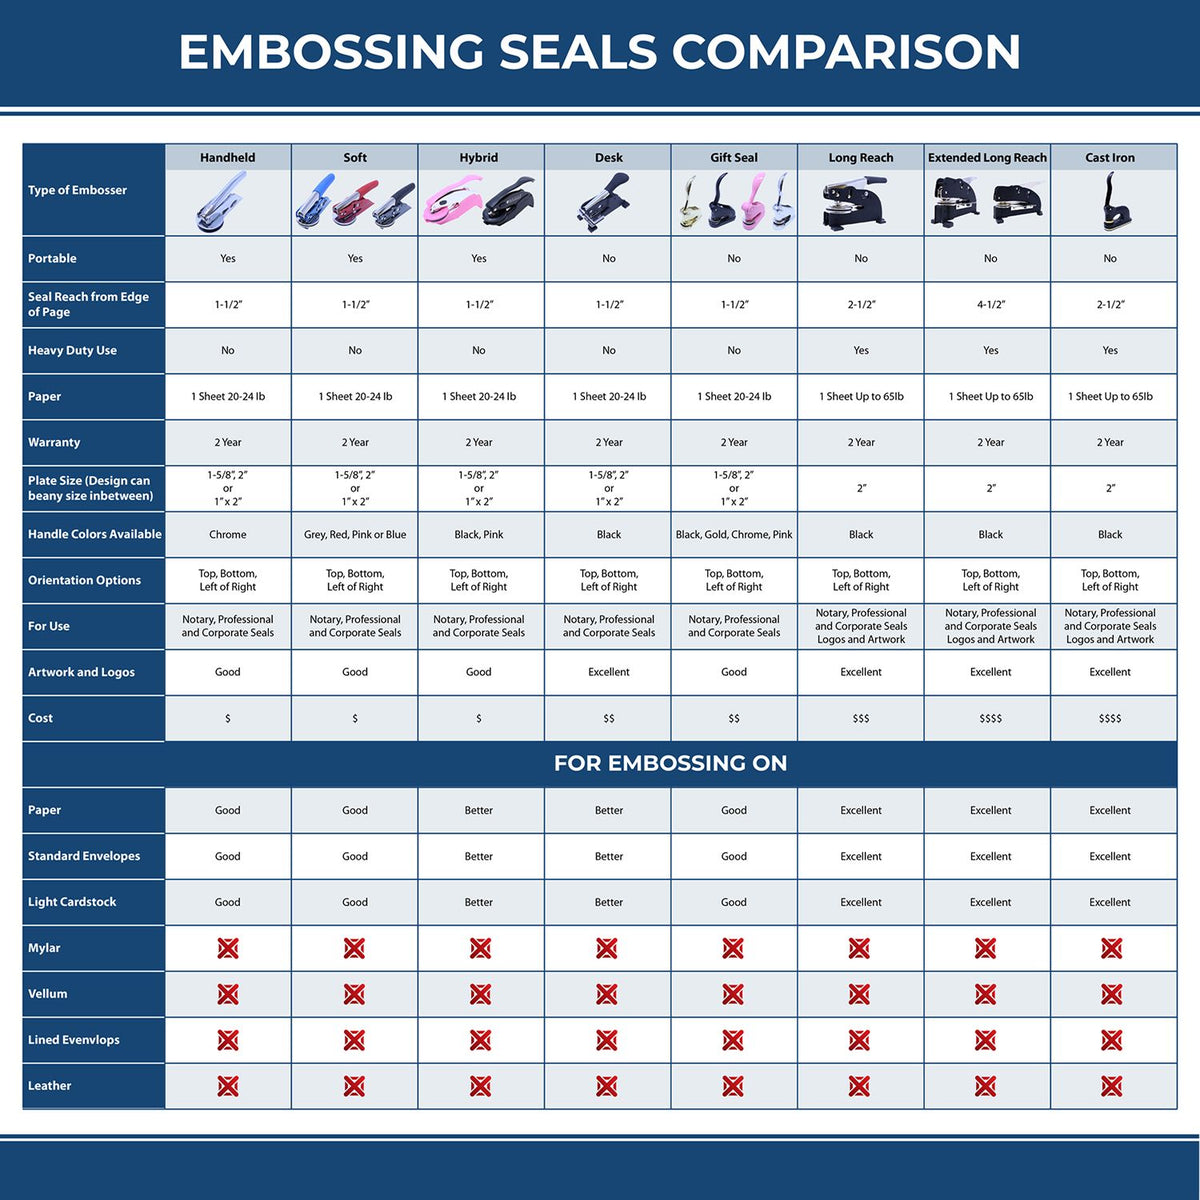 A comparison chart for the different types of mount models available for the Long Reach Illinois Geology Seal